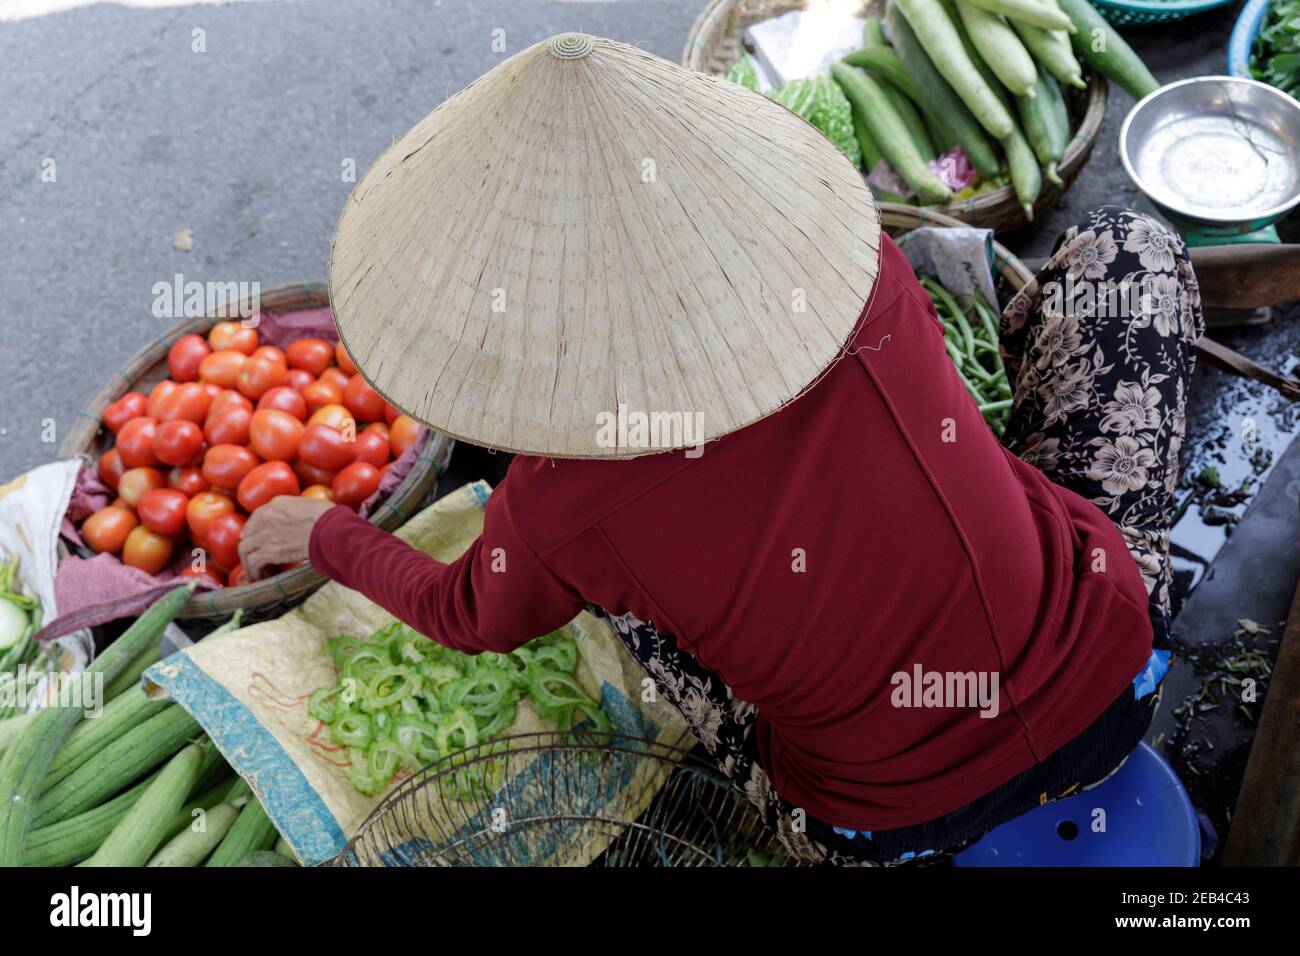 A Vietnamese woman selling vegetables in Hoi An, Vietnam. Stock Photo